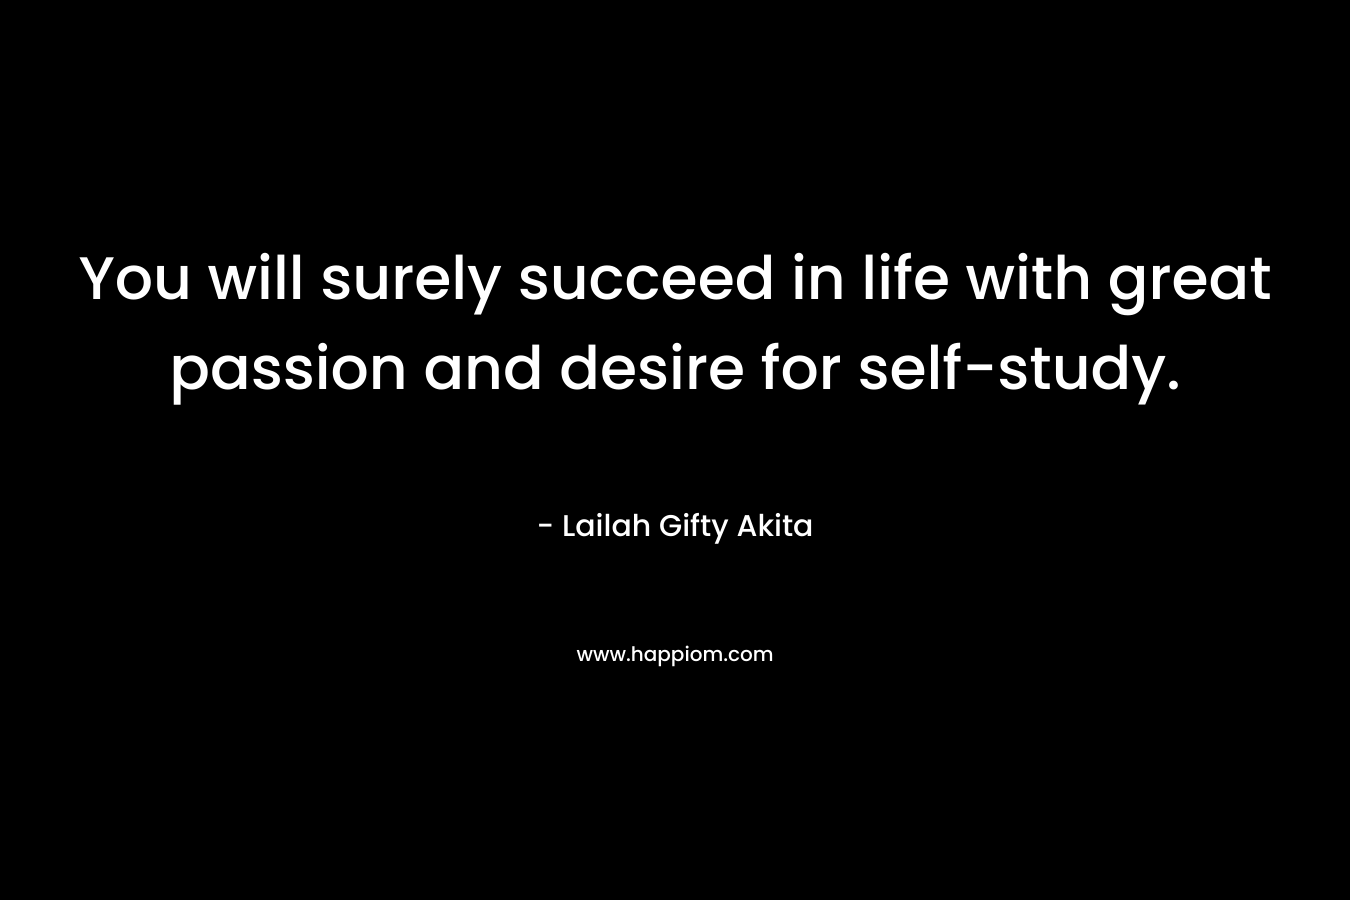 You will surely succeed in life with great passion and desire for self-study.